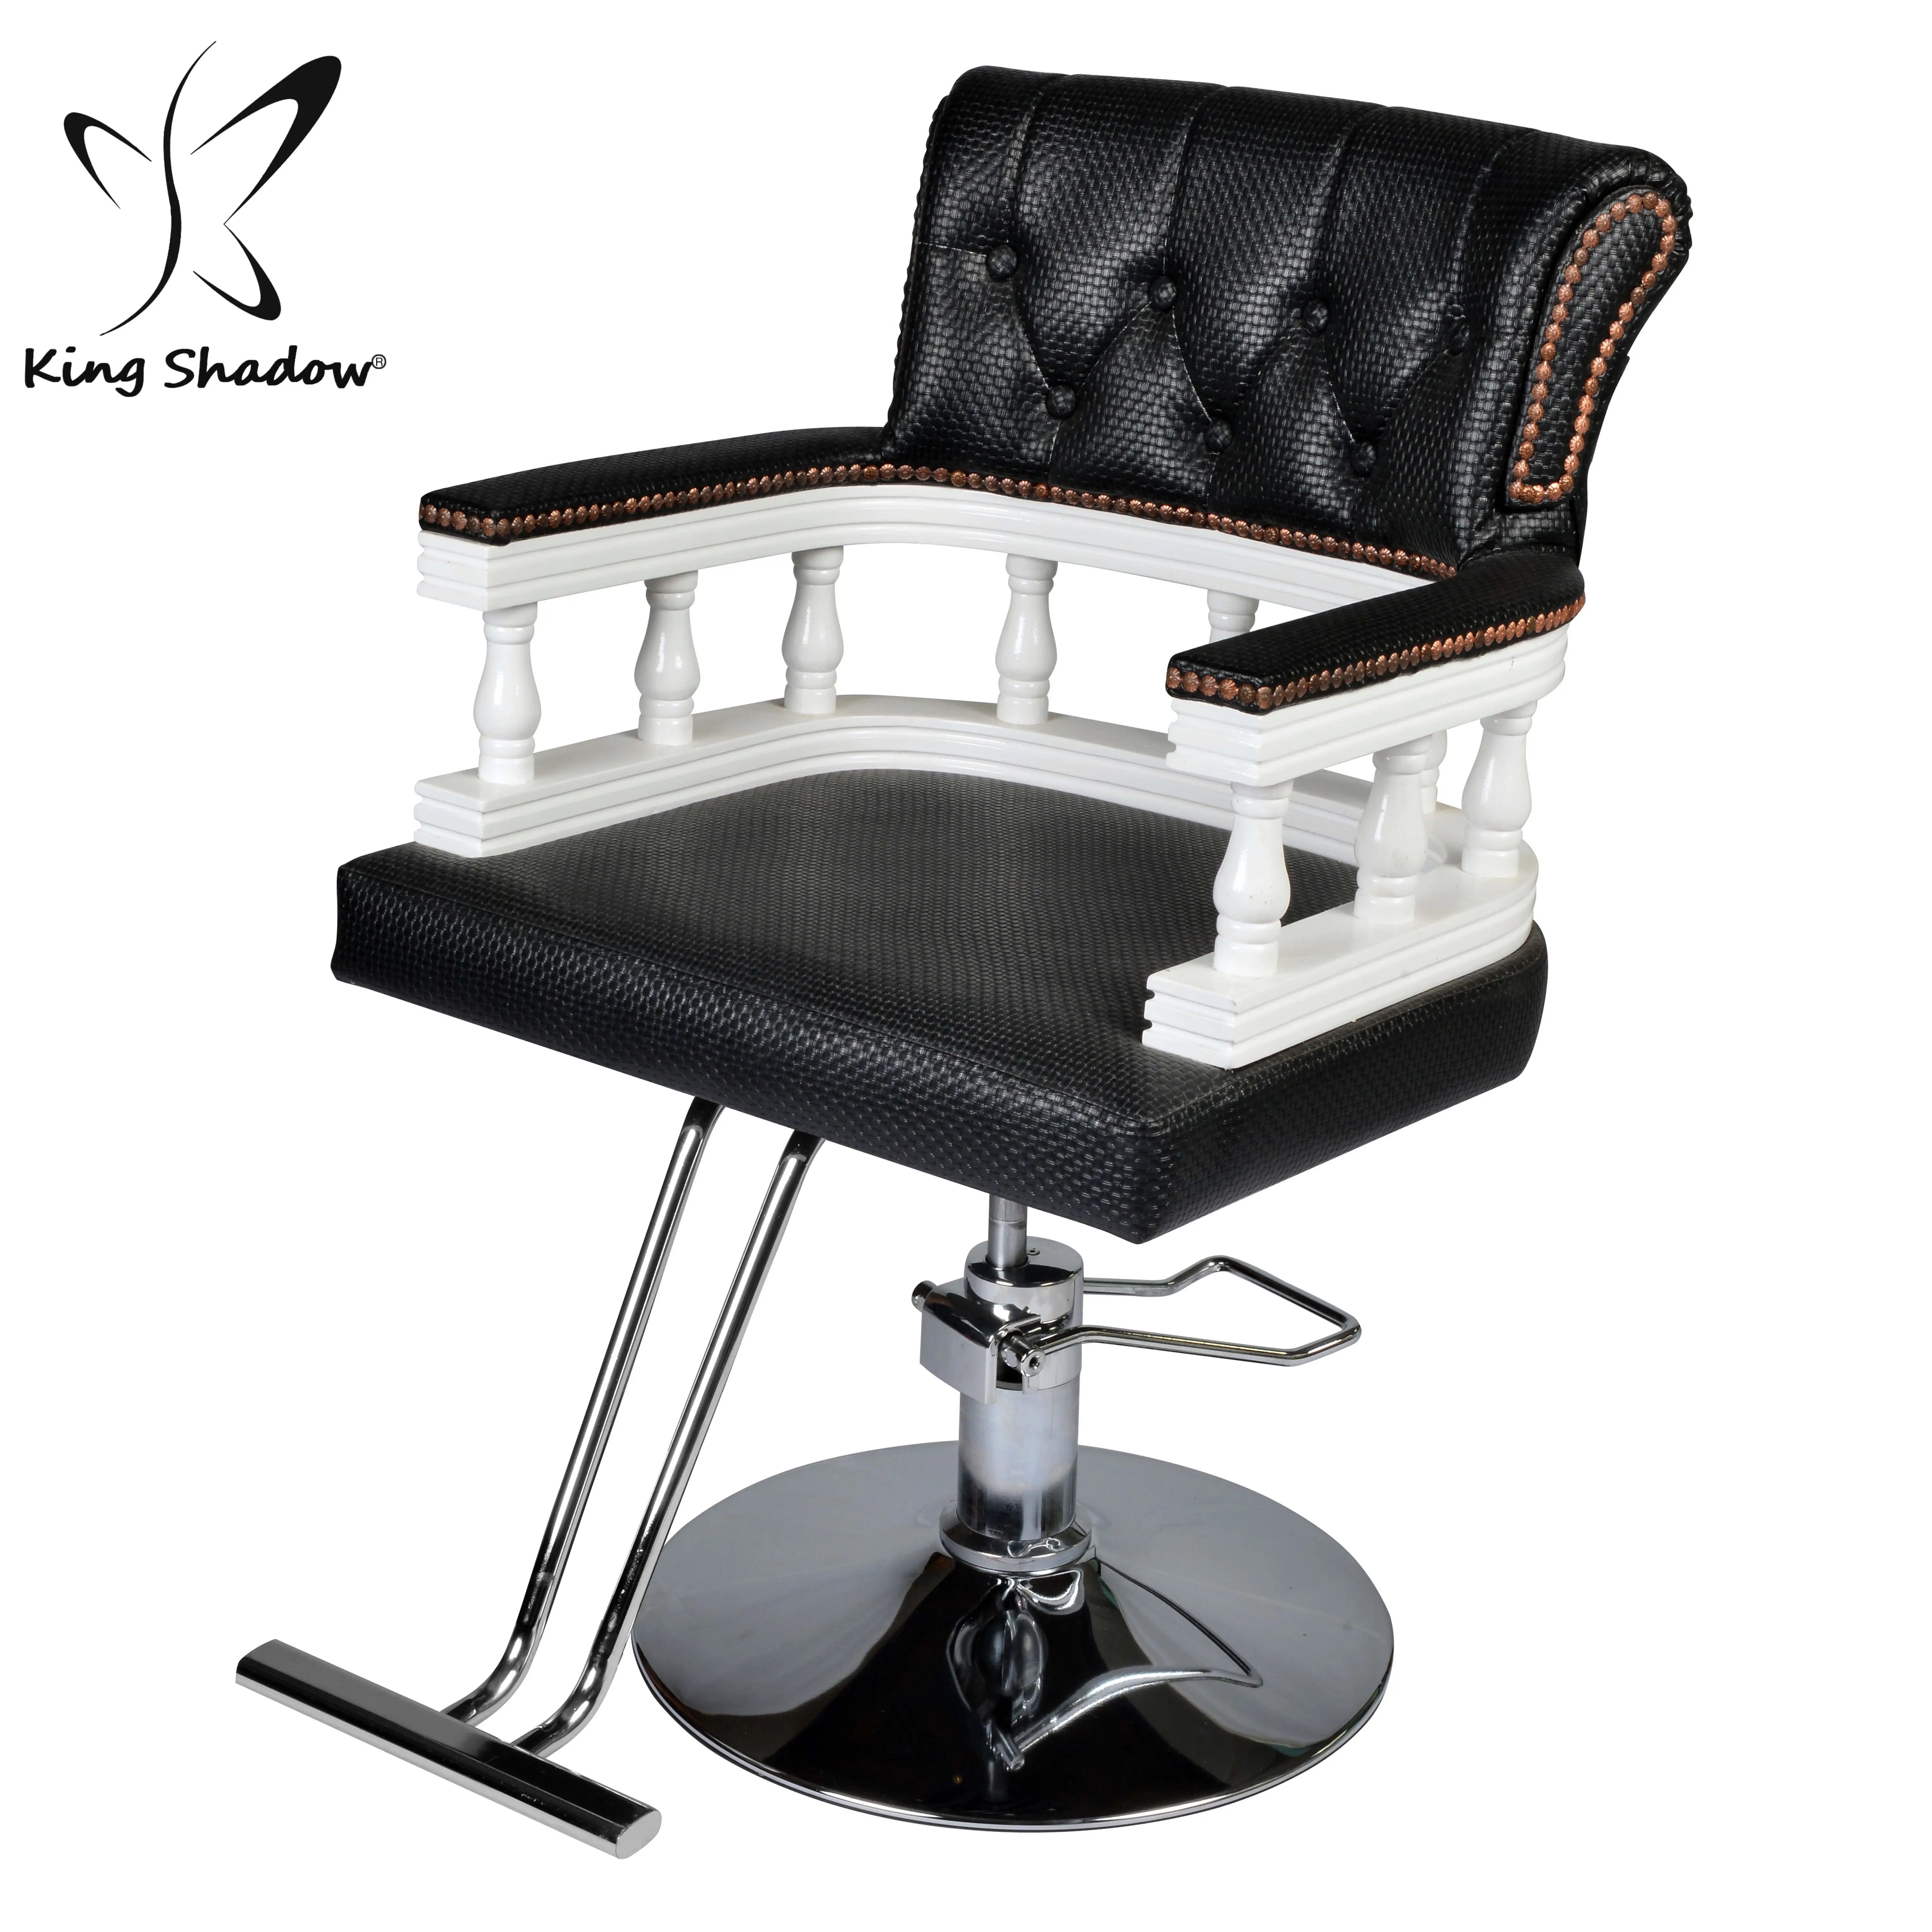 2018 Kingshadow Cheap Styling Chair For Sale Craigslist Barber Shop